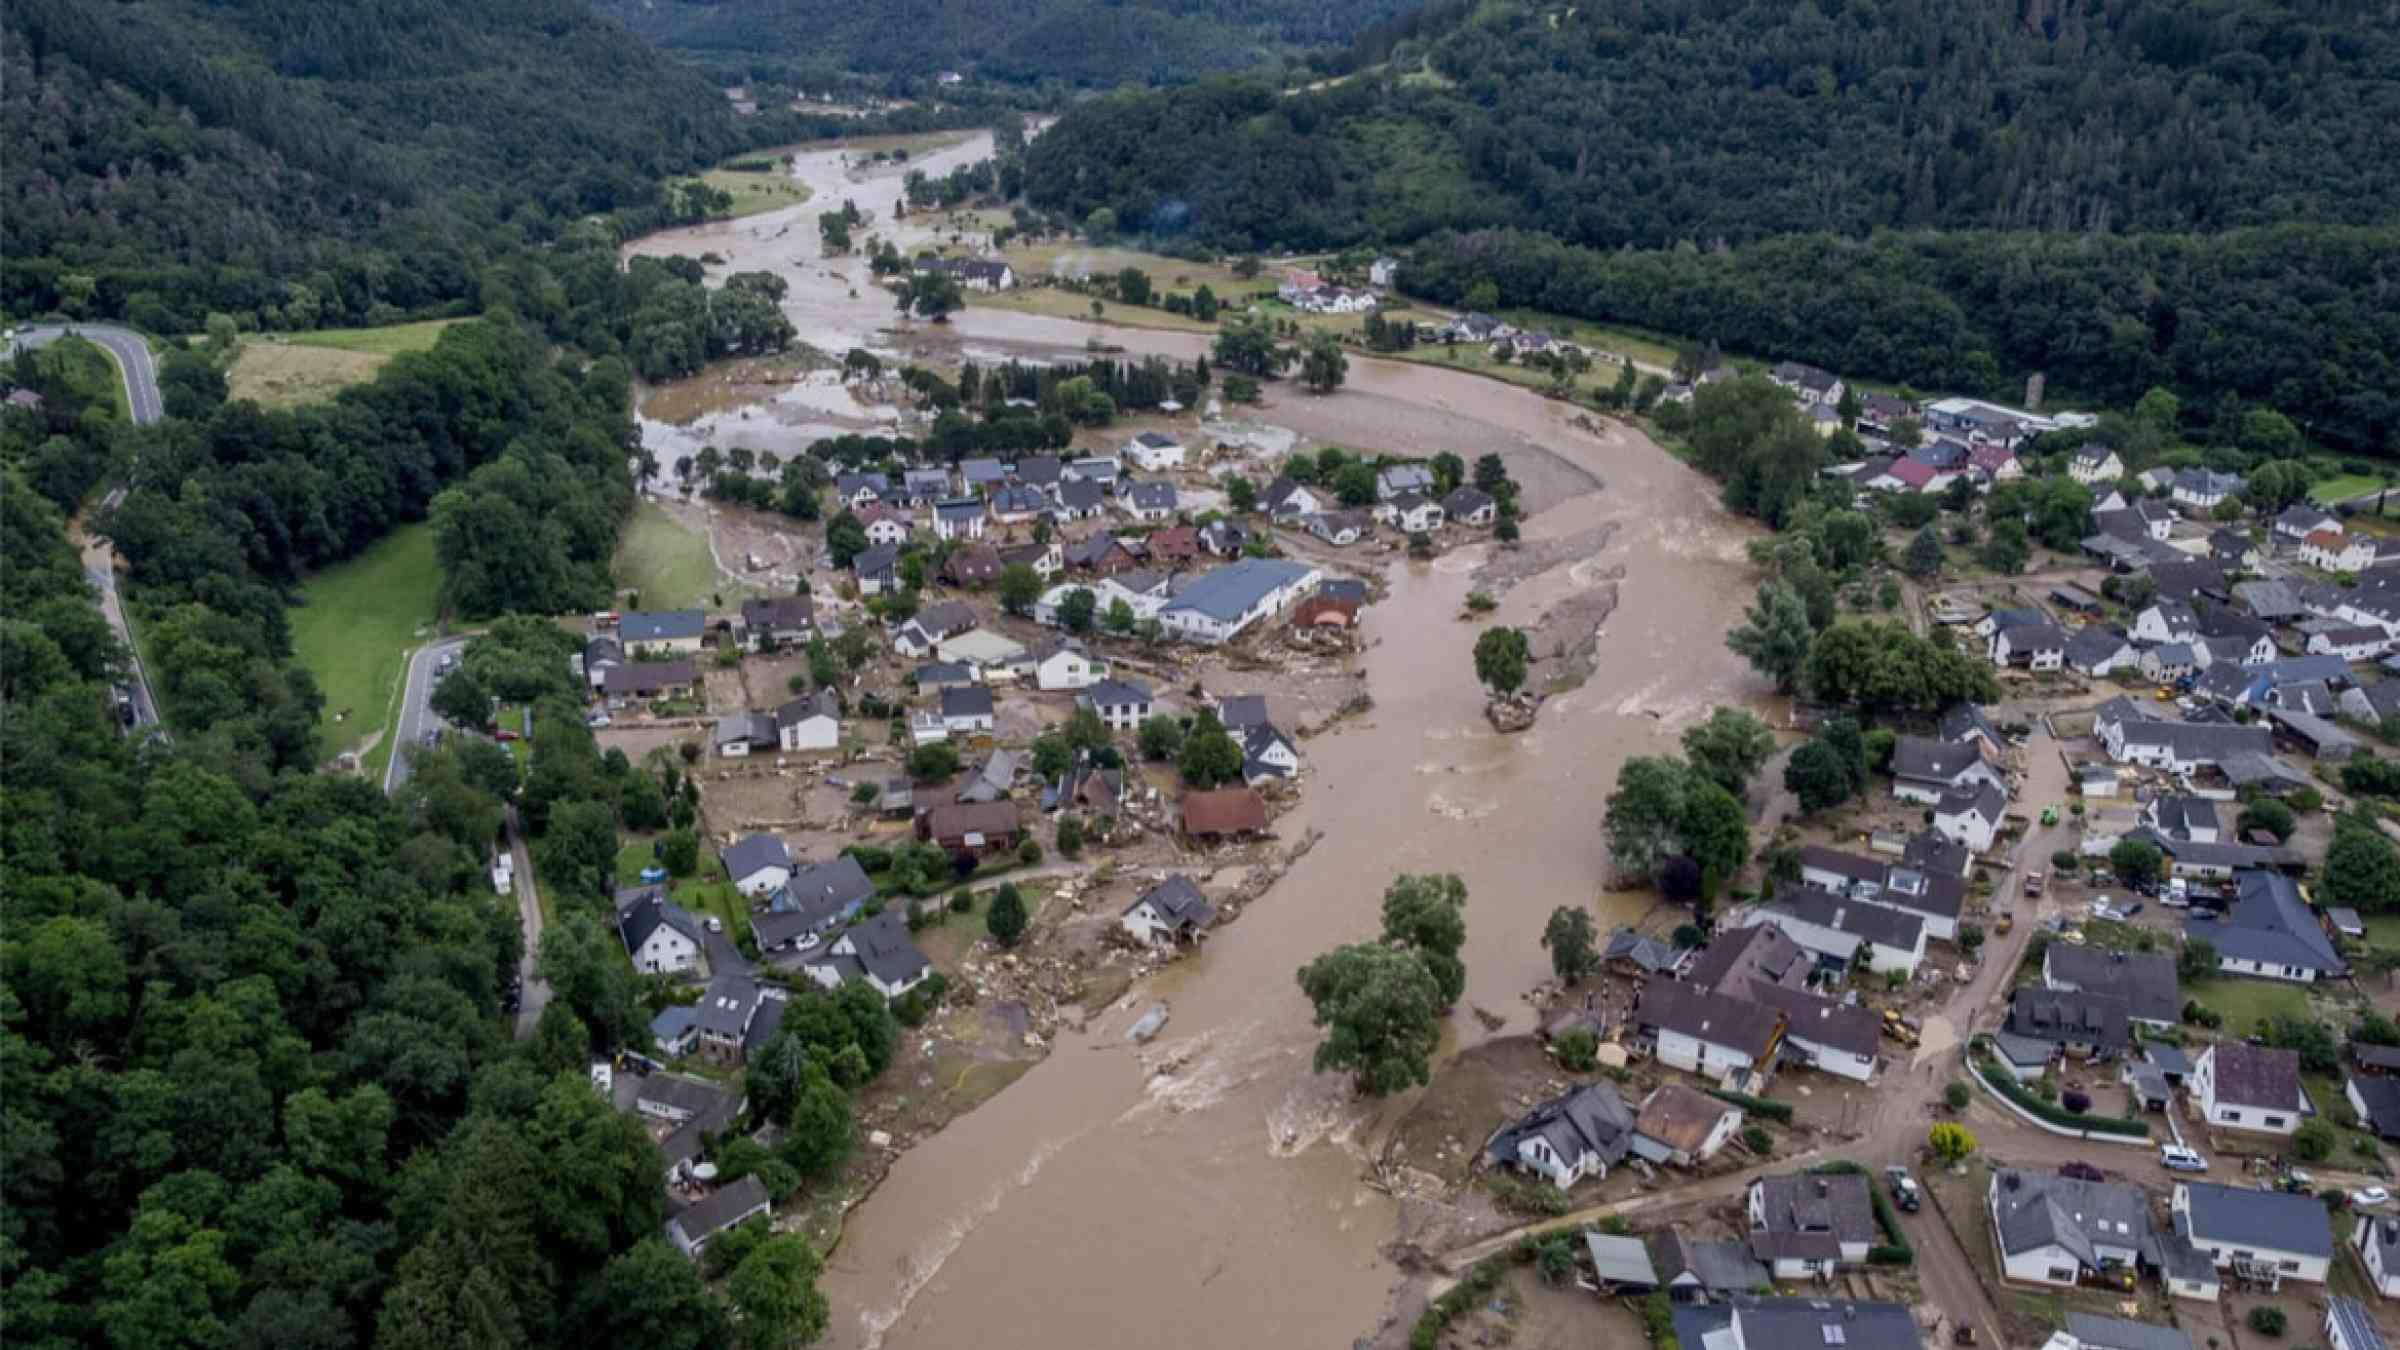 The Ahr river flows past houses destroyed by floods in Insul, Germany (2021)